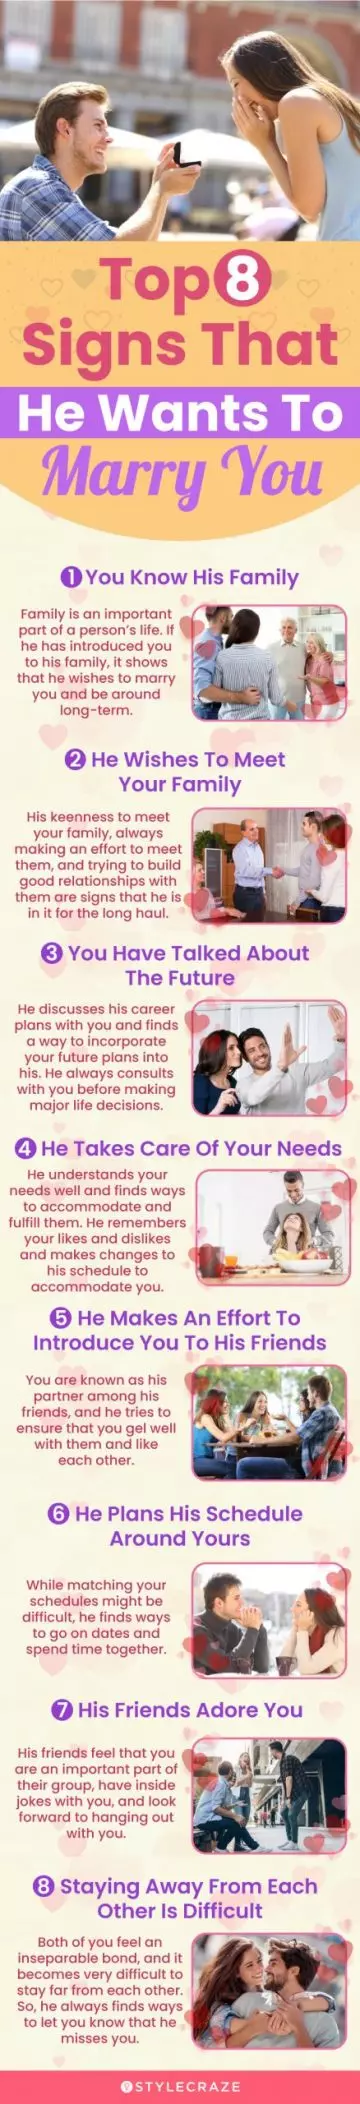 top 8 signs that he wants to marry you (infographic)